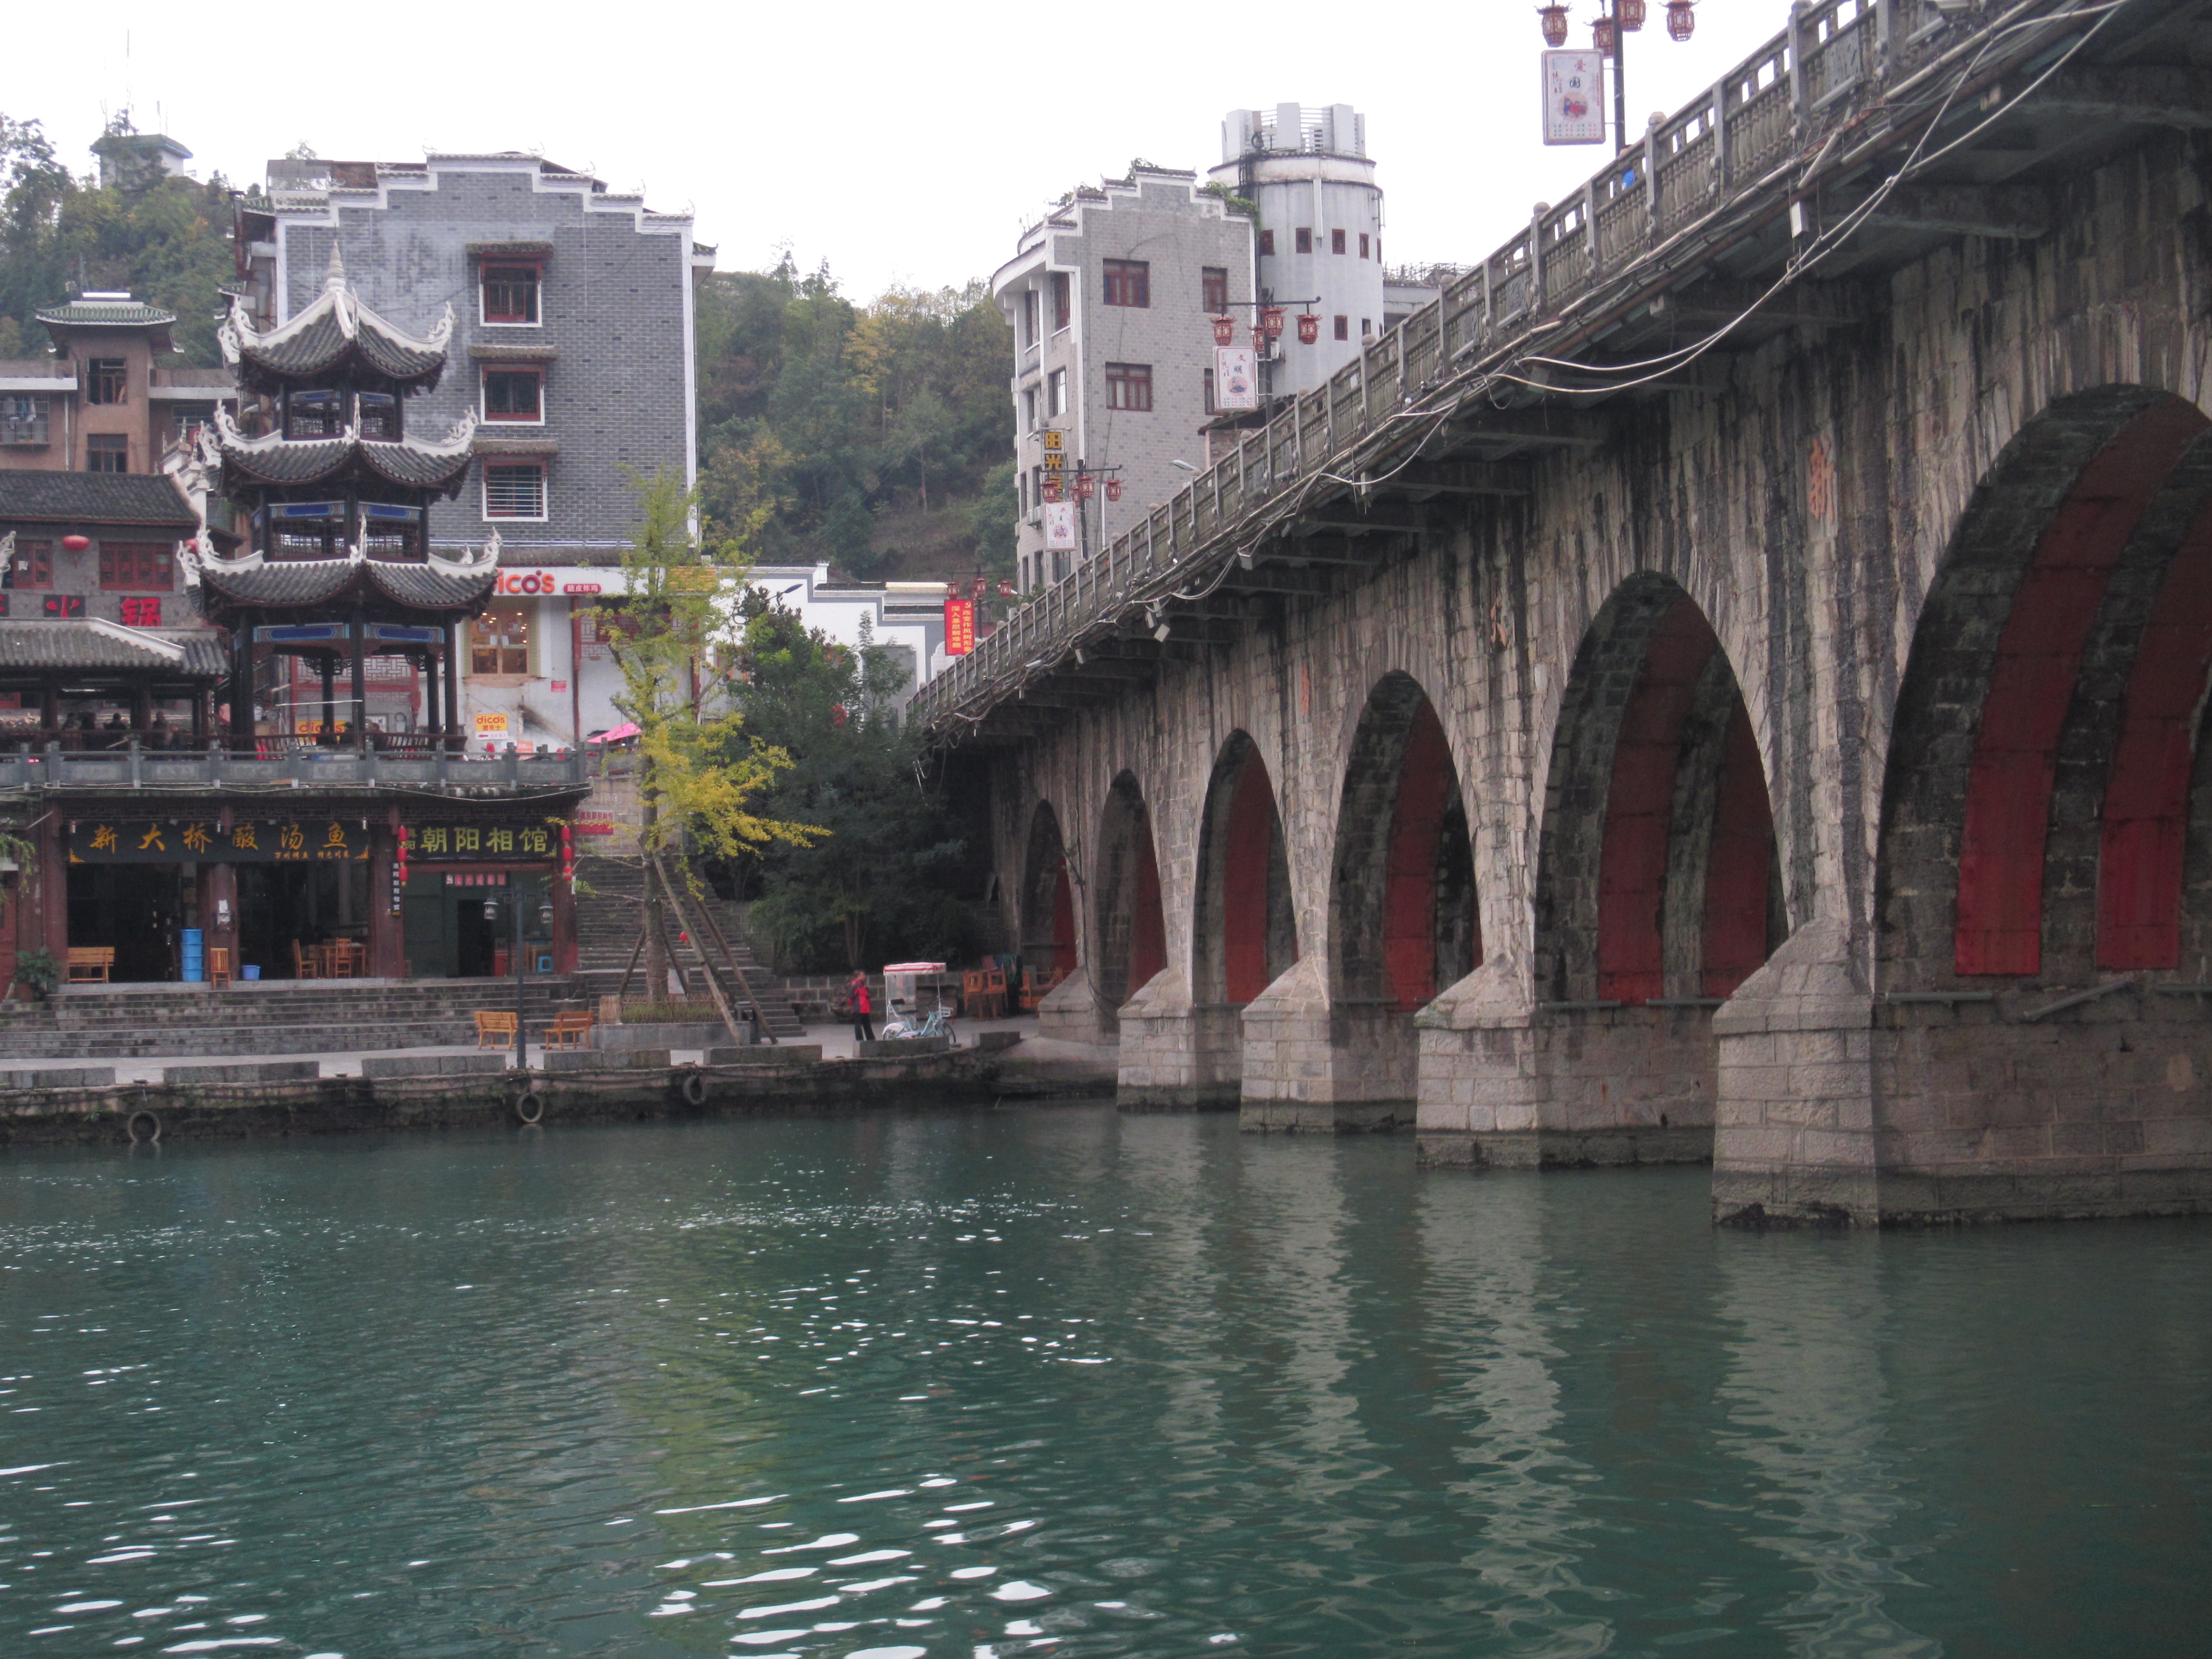 This bridge was the object of many of my photos.  It connects the north and south ends of town, which are divided by the Wuyang River